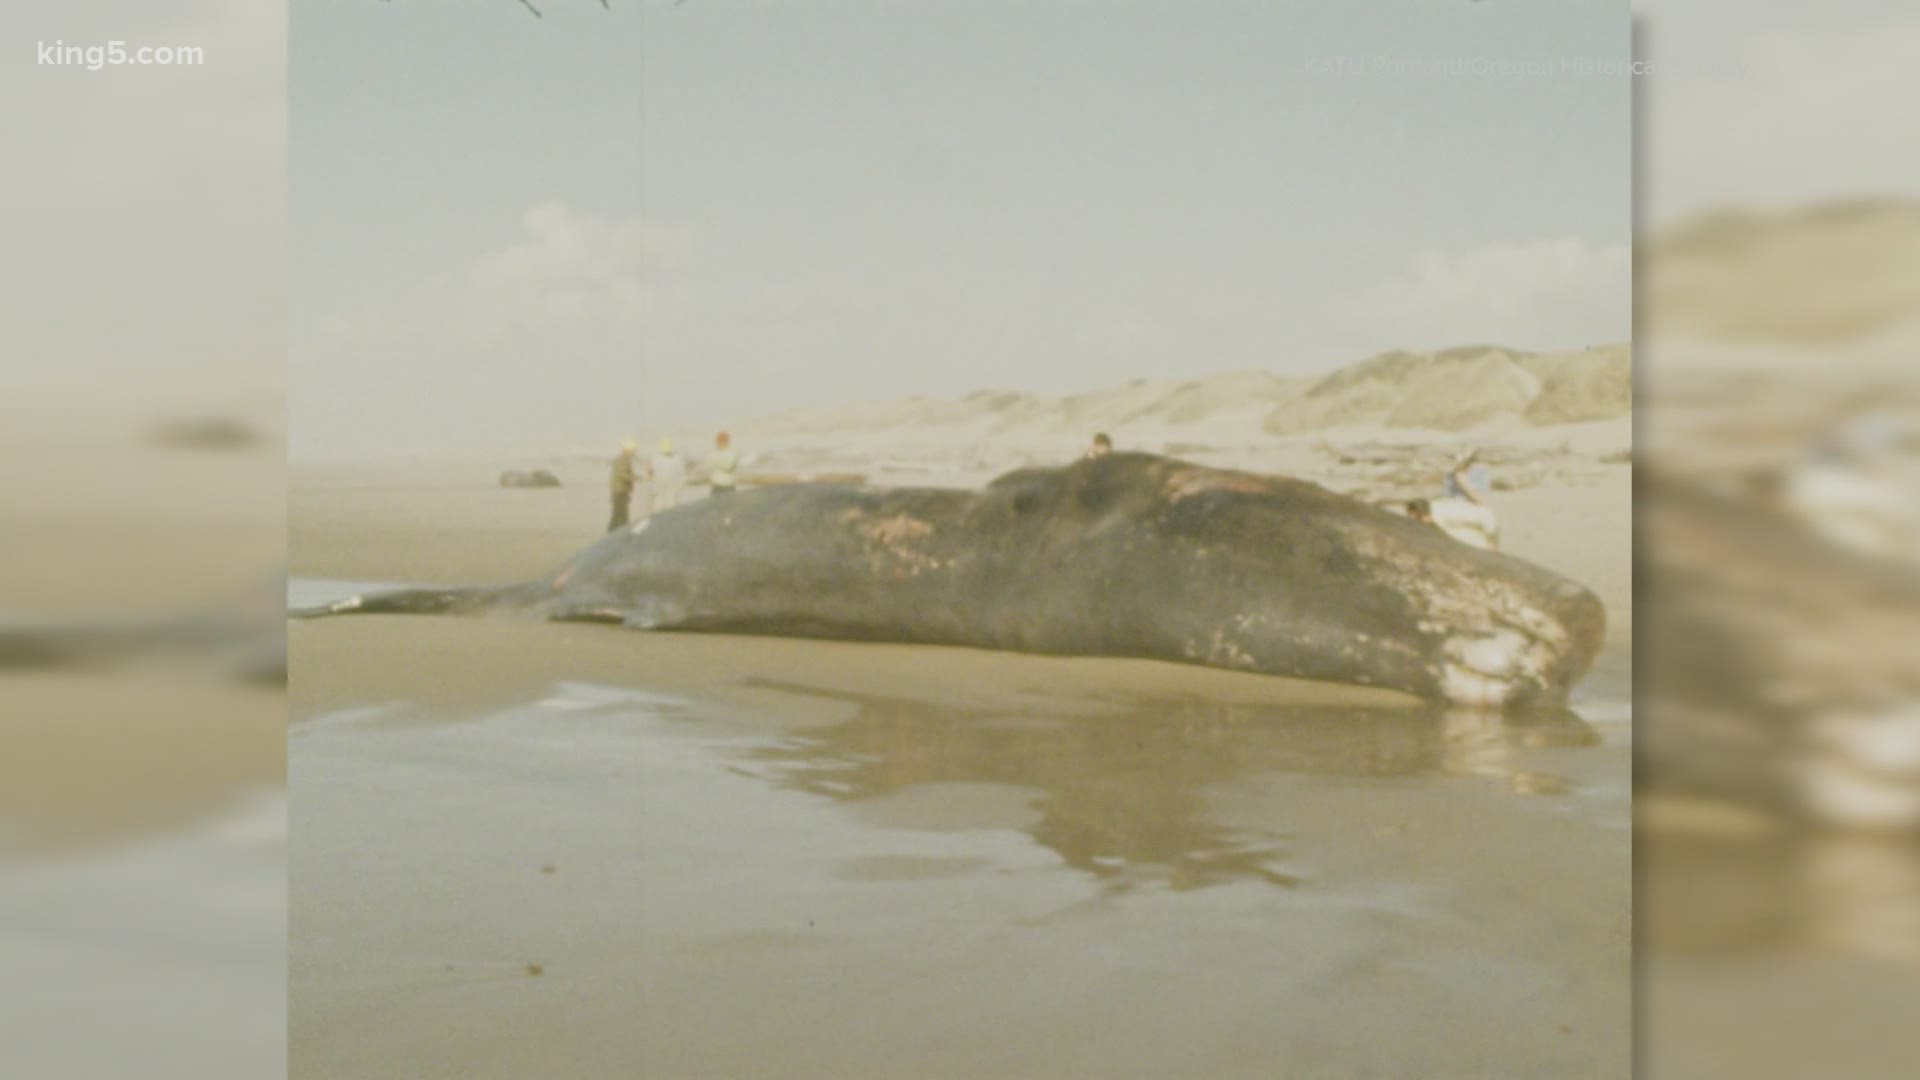 The massive creature washed up on the beach near Florence, Oregon in 1970. Officials decided to dispose of the whale using an unorthodox technique -- dynamite.